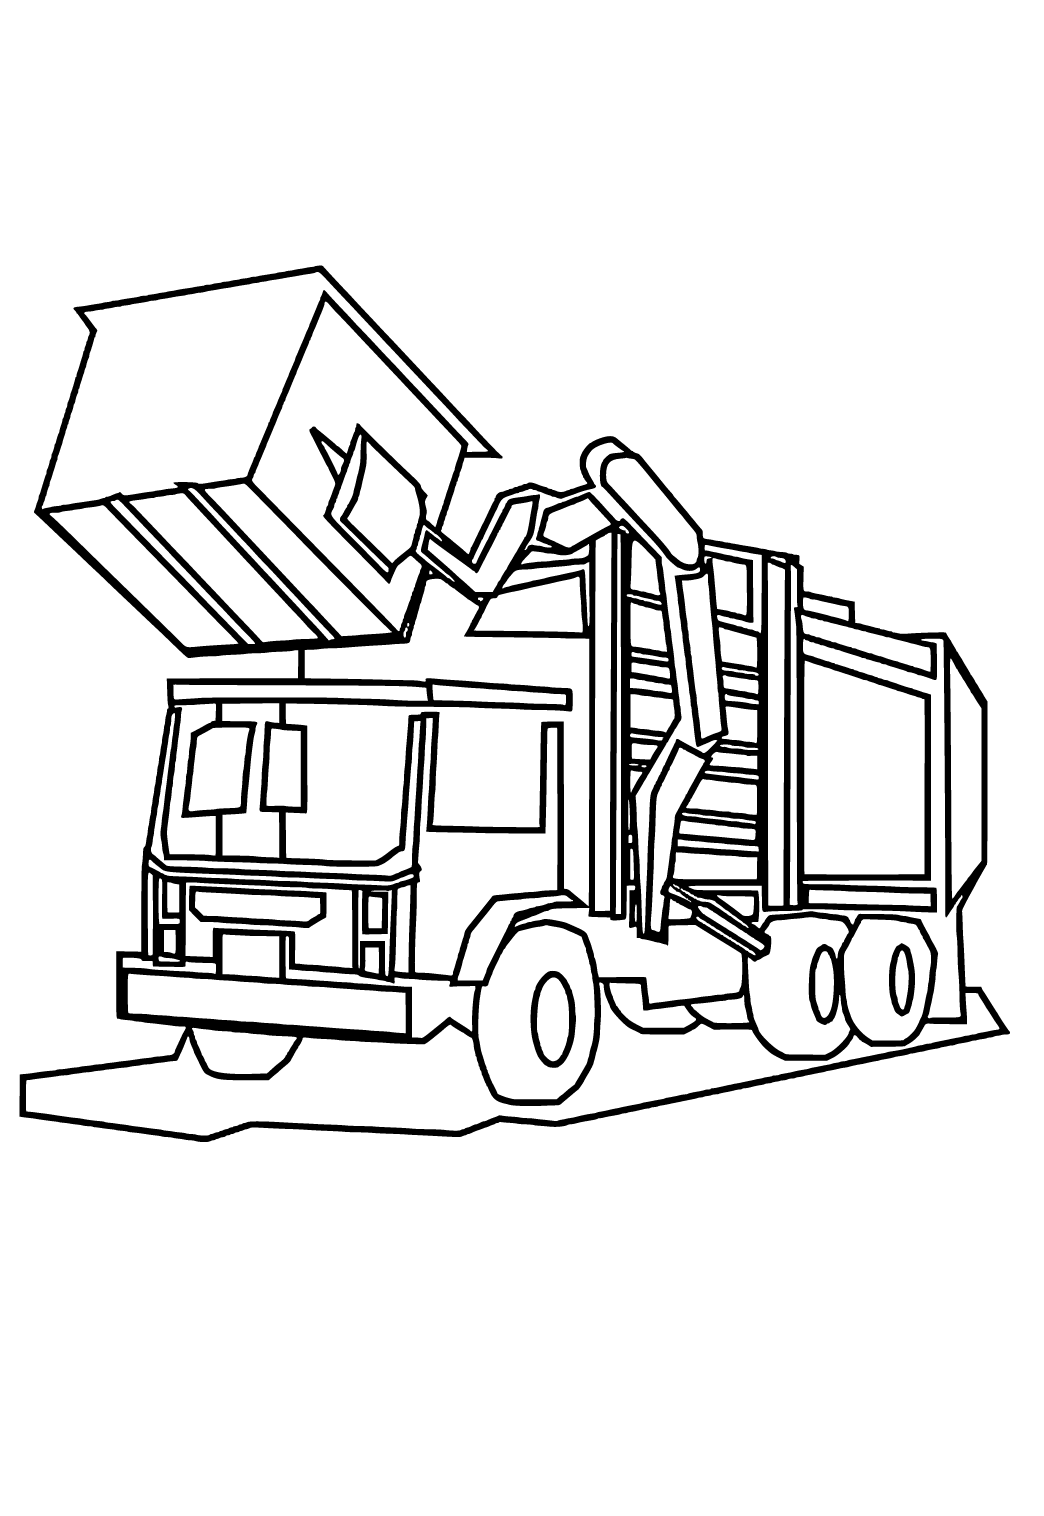 Free Printable Garbage Trash Truck Works Coloring Page, Sheet and Picture  for Adults and Kids (Girls and Boys) - Babeled.com